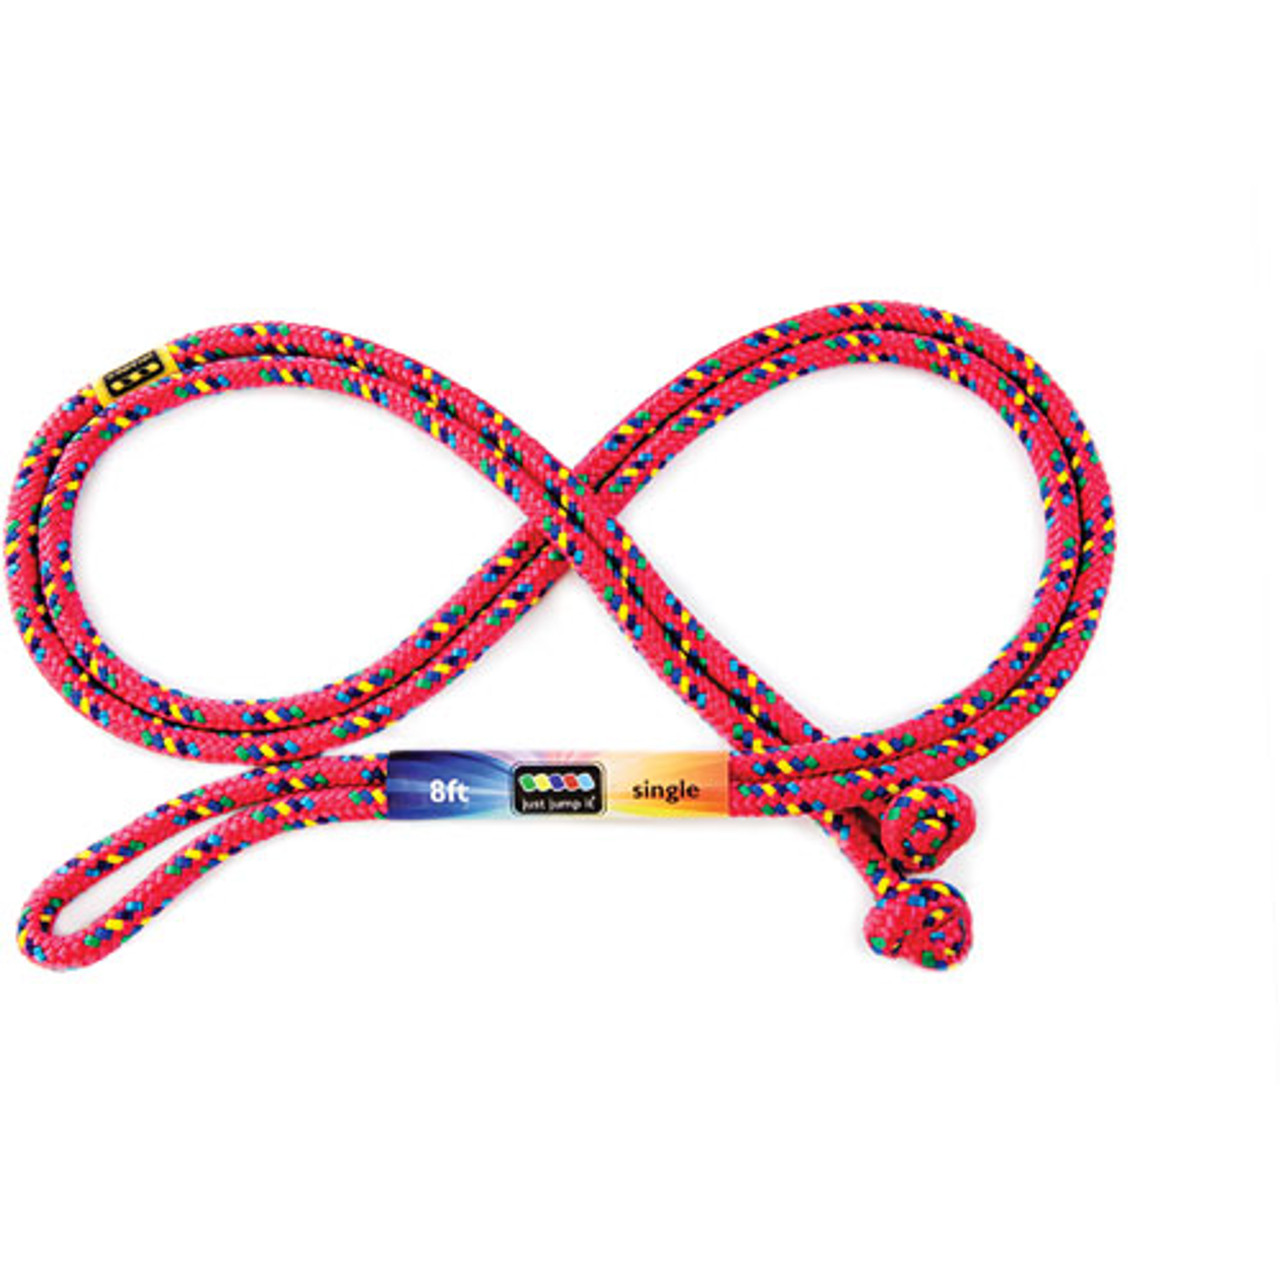 RED JUMP ROPE 8FT